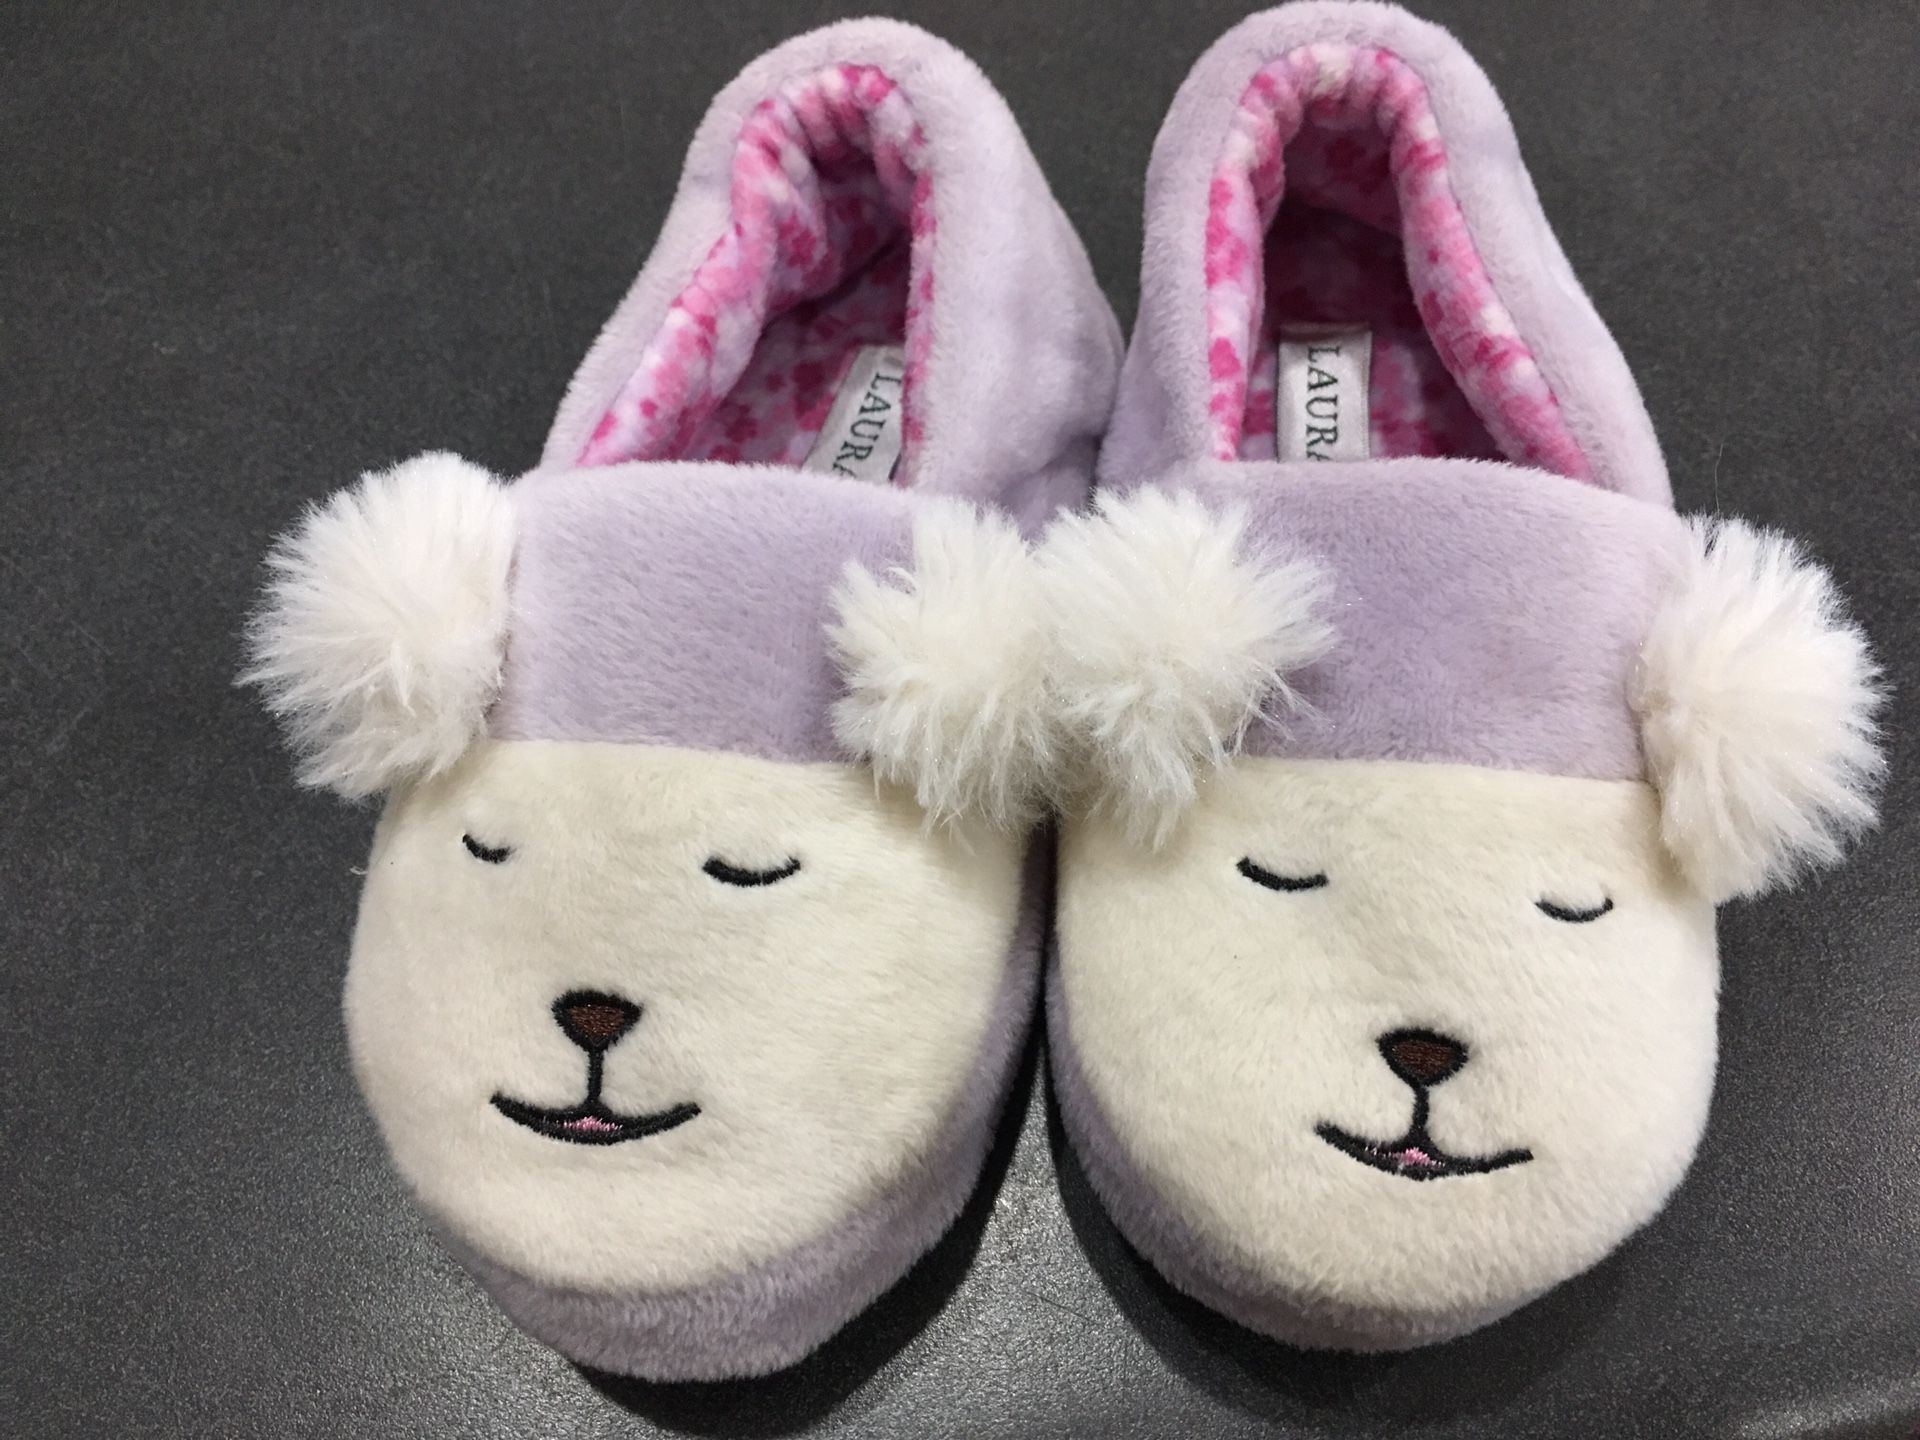 Adorable infant slippers. Size 5/6 & 7